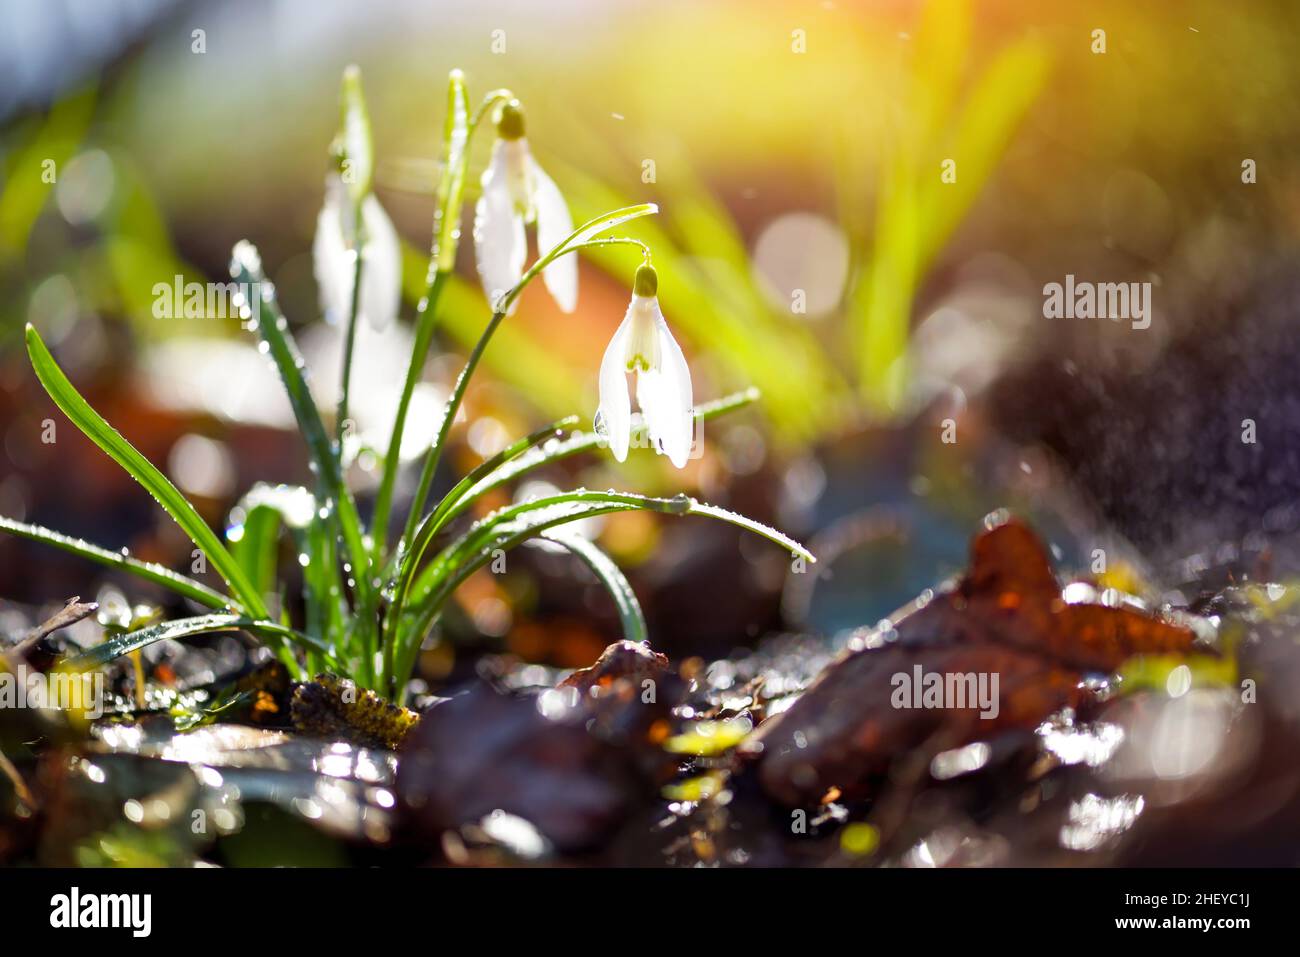 Snowdrops (Galanthus) in the sunlight. Harbingers of warming symbolize the arrival of spring. Stock Photo